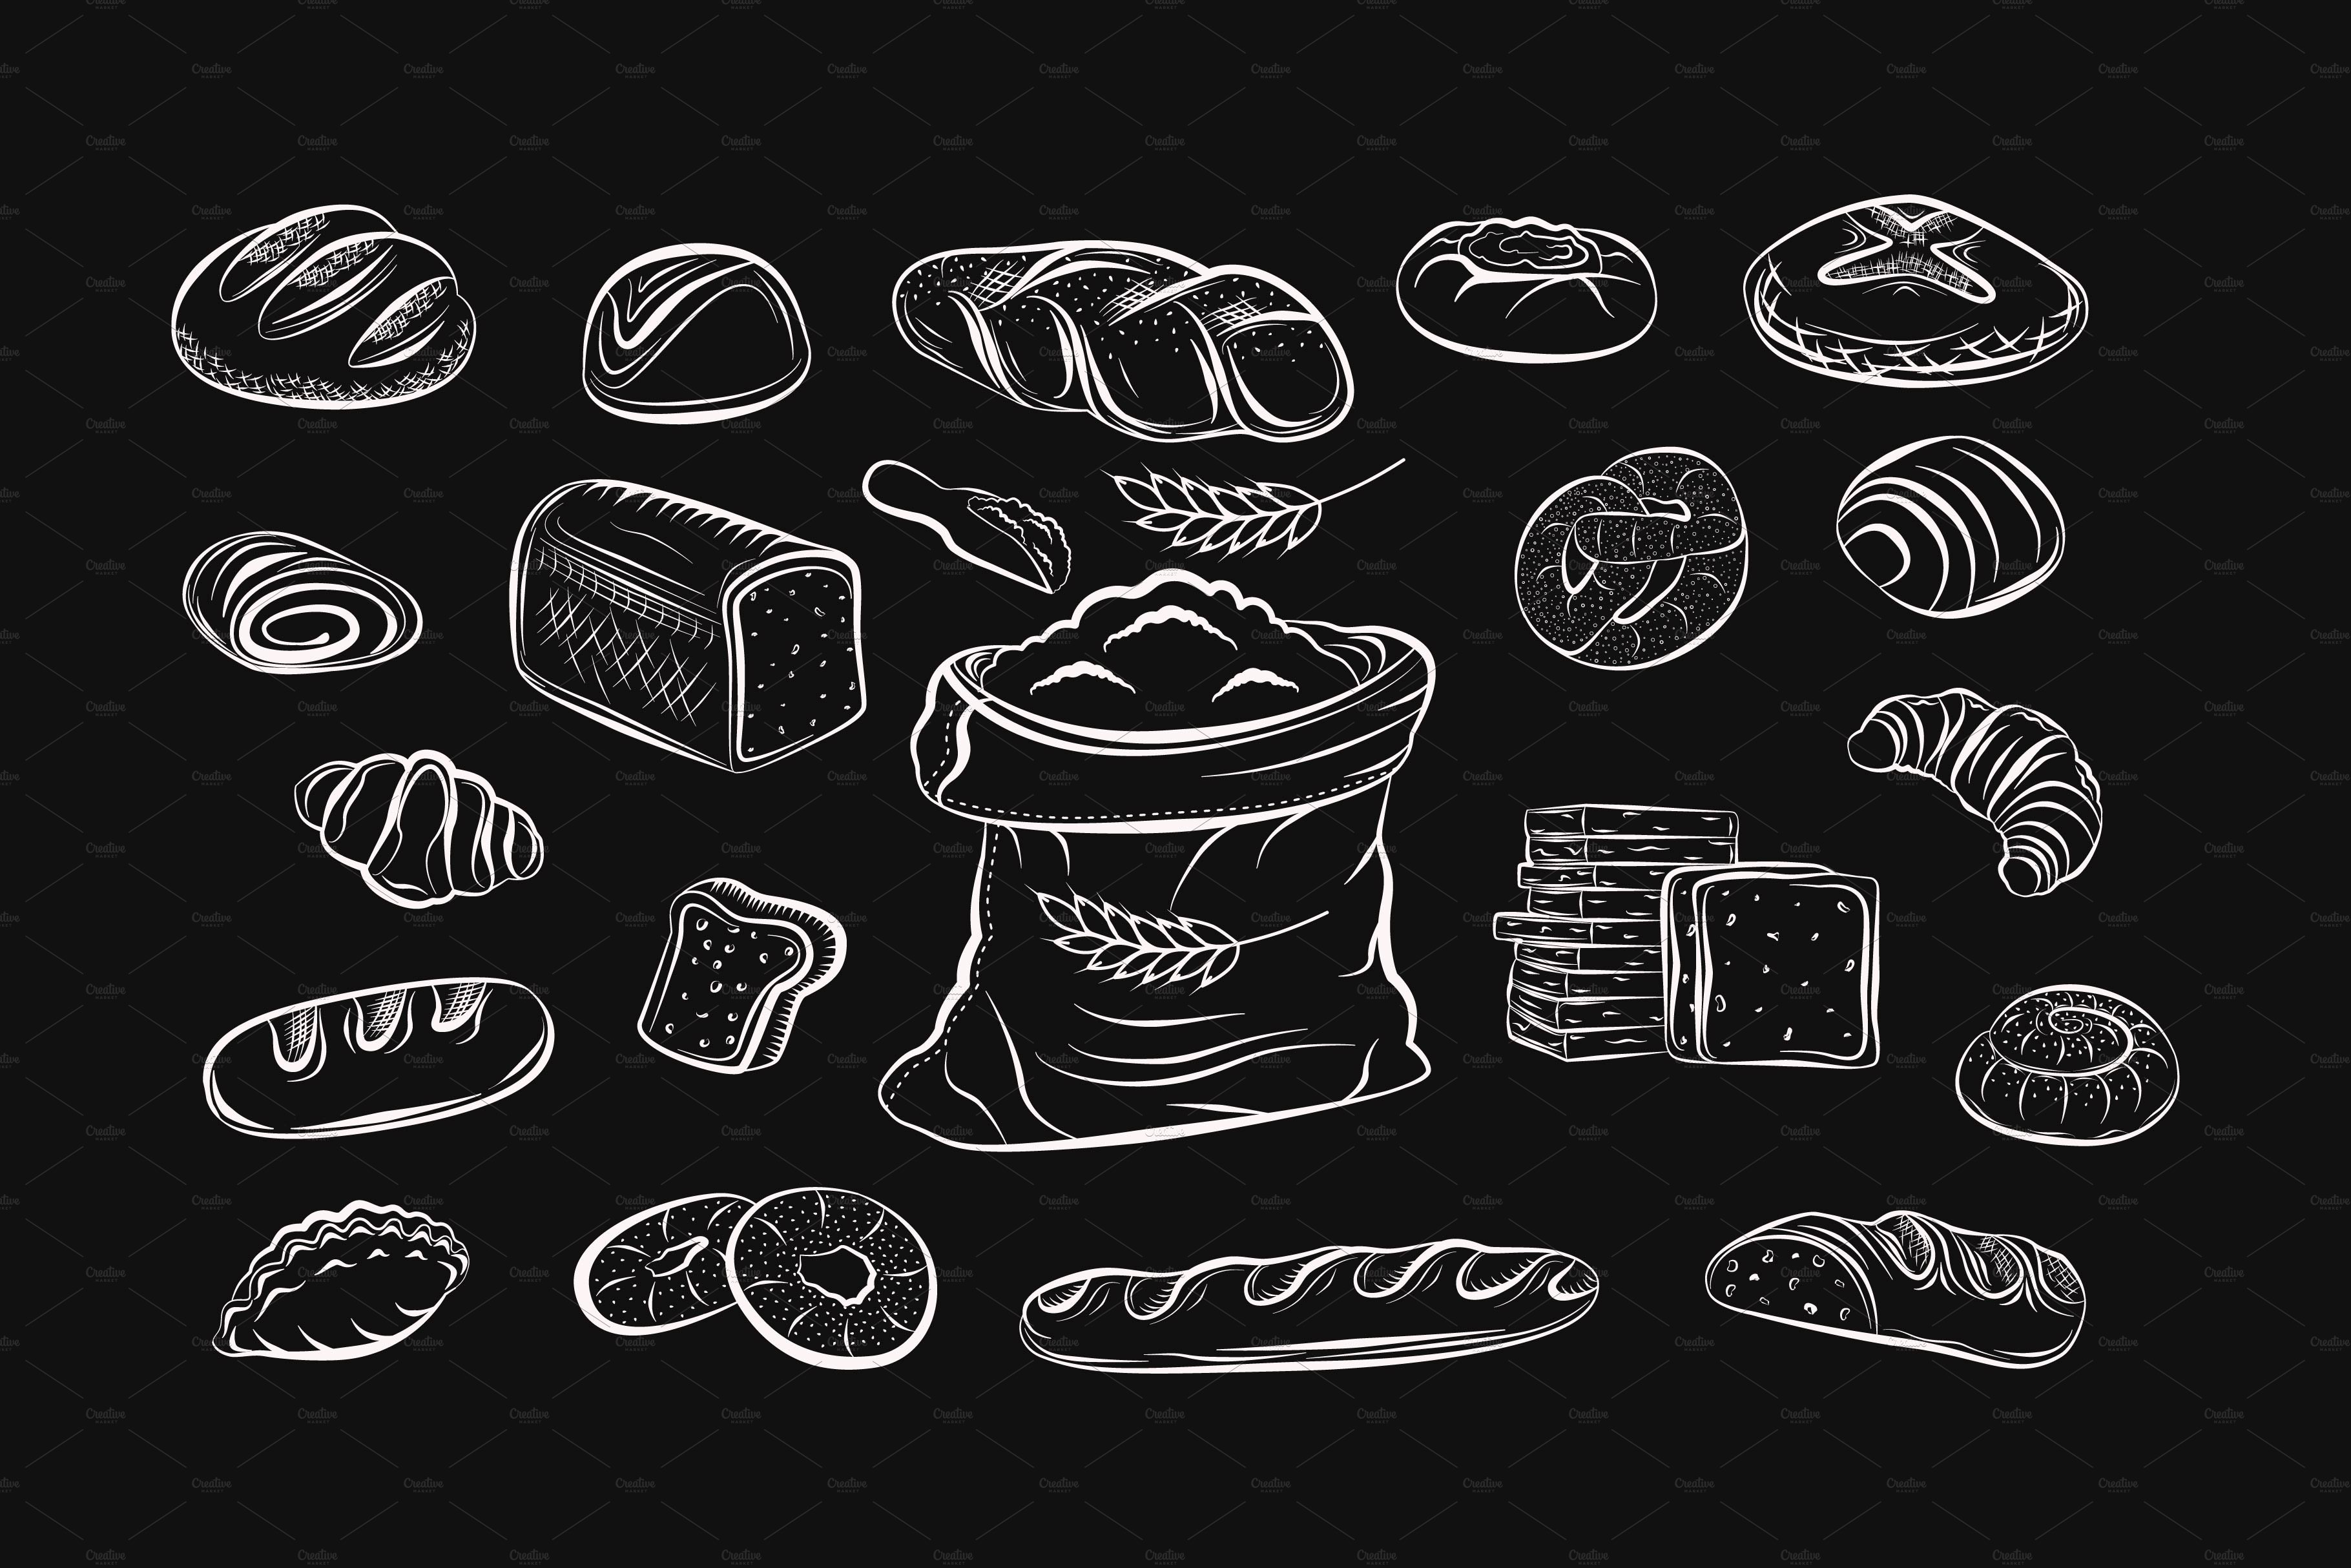 Bakery products preview image.